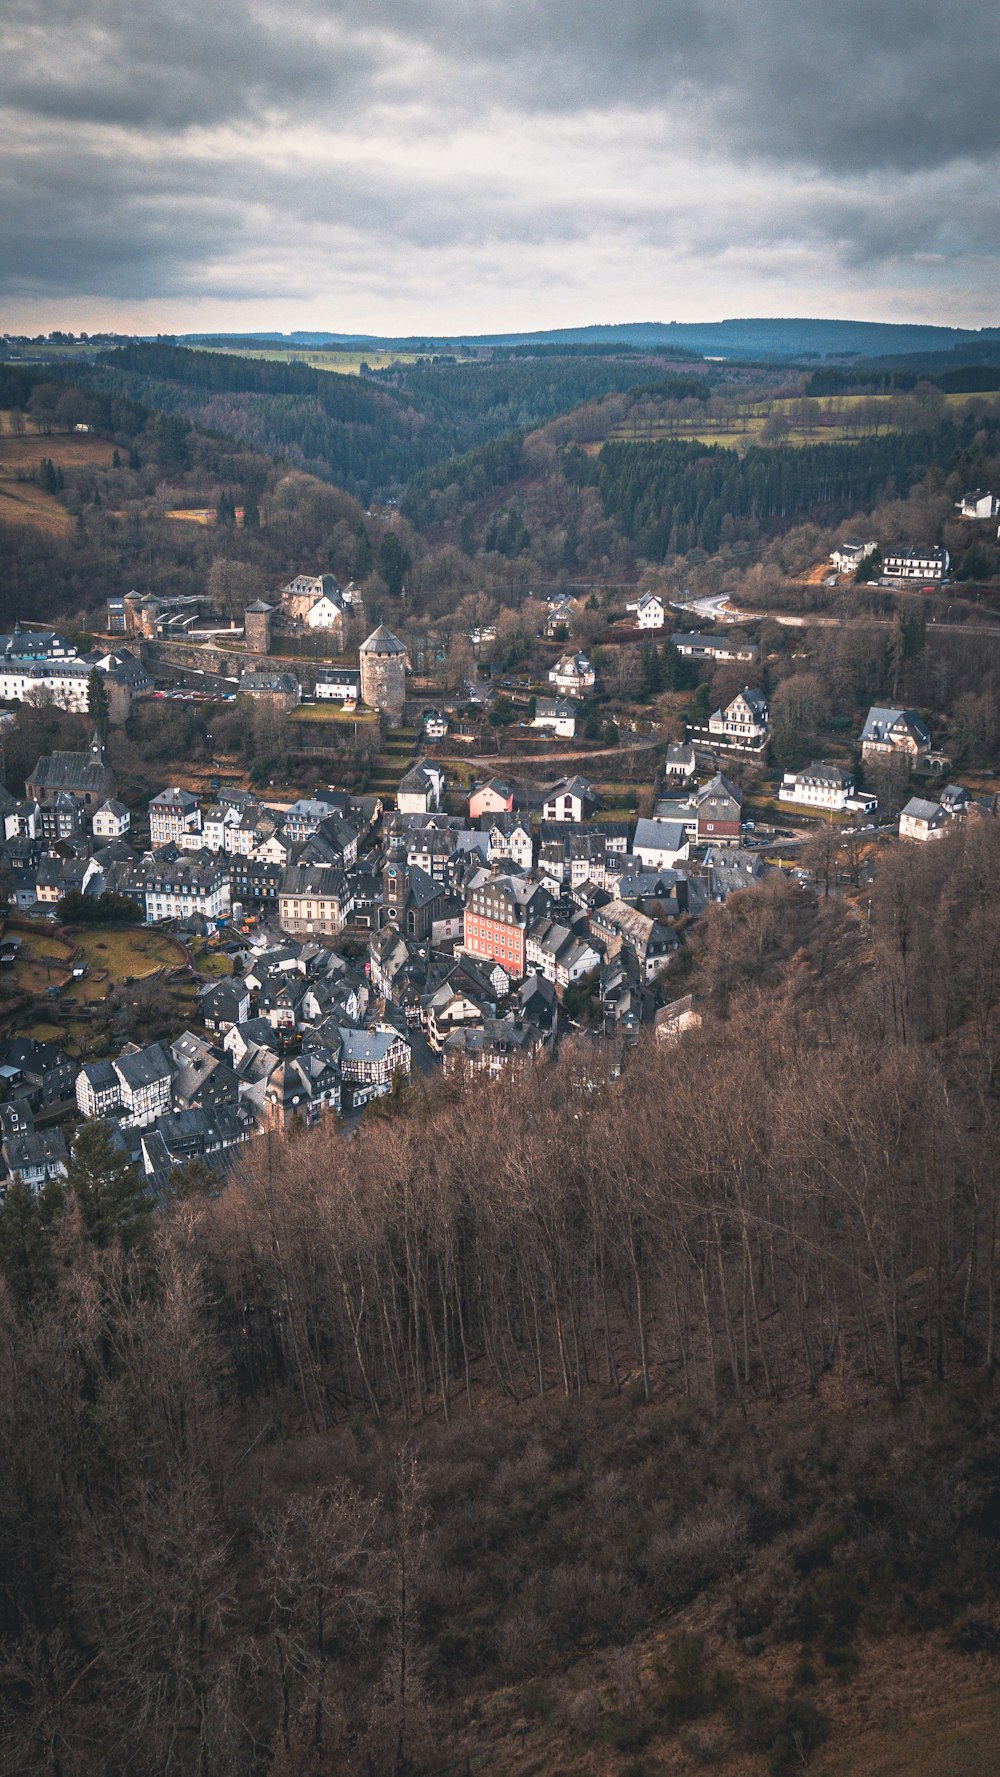 a small town nestled on a hill in the middle of a forest